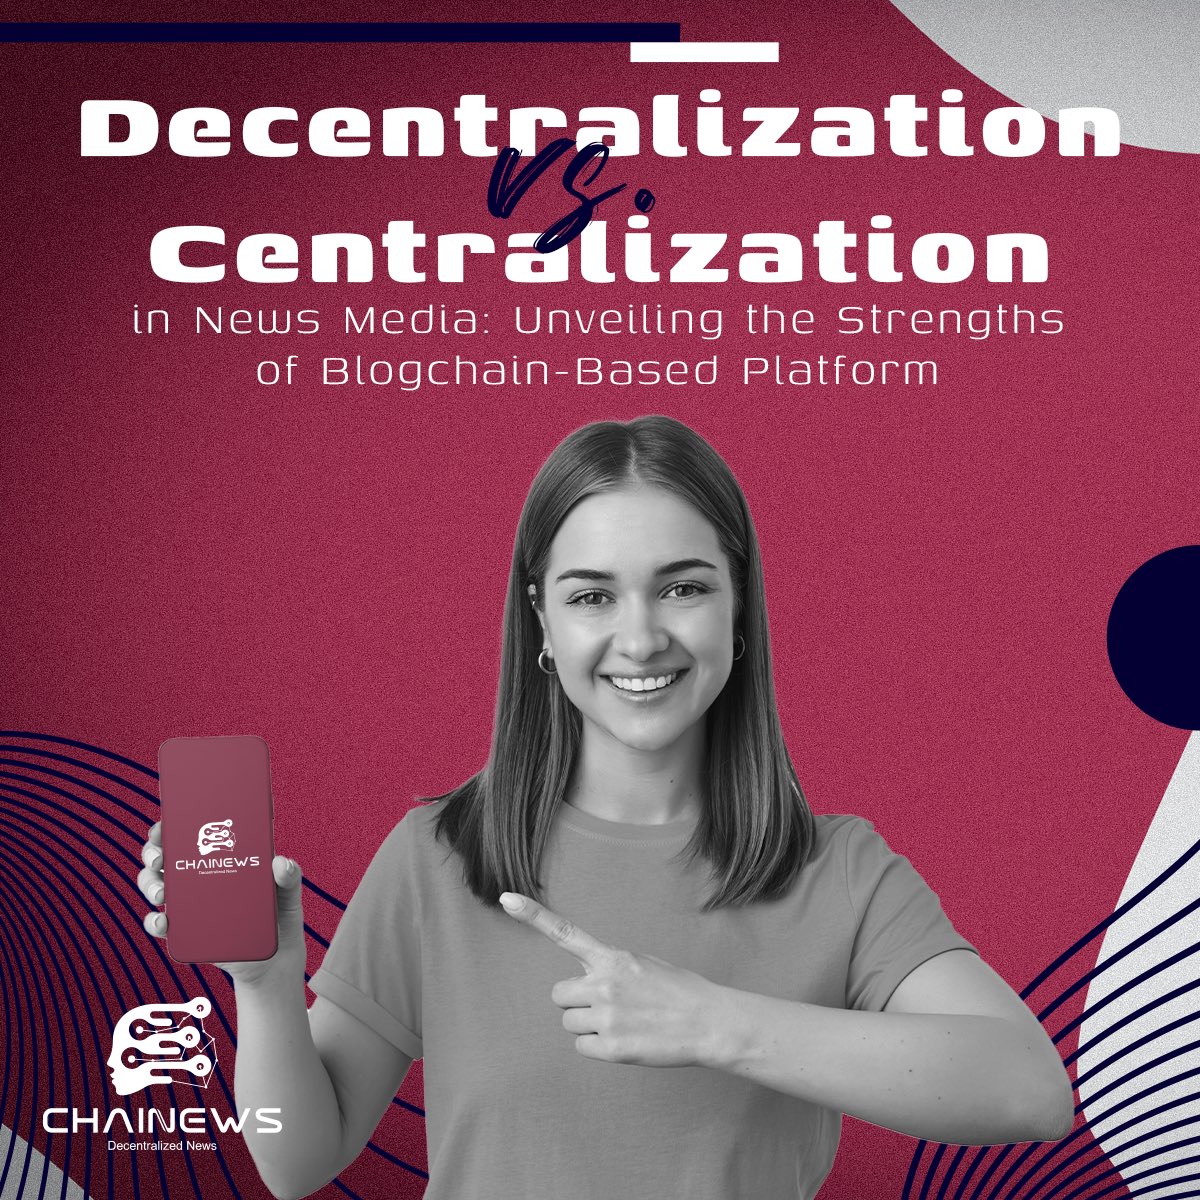 Chainews blog page is online! Decentralization vs. Centralization in News Media: Unveiling the Strengths of Blogchain-Based Platforms. You can visit our website to read. 🌐 chainews.org #blockchain #blockchaintechnology #blockchainnews #blockchains #chainews